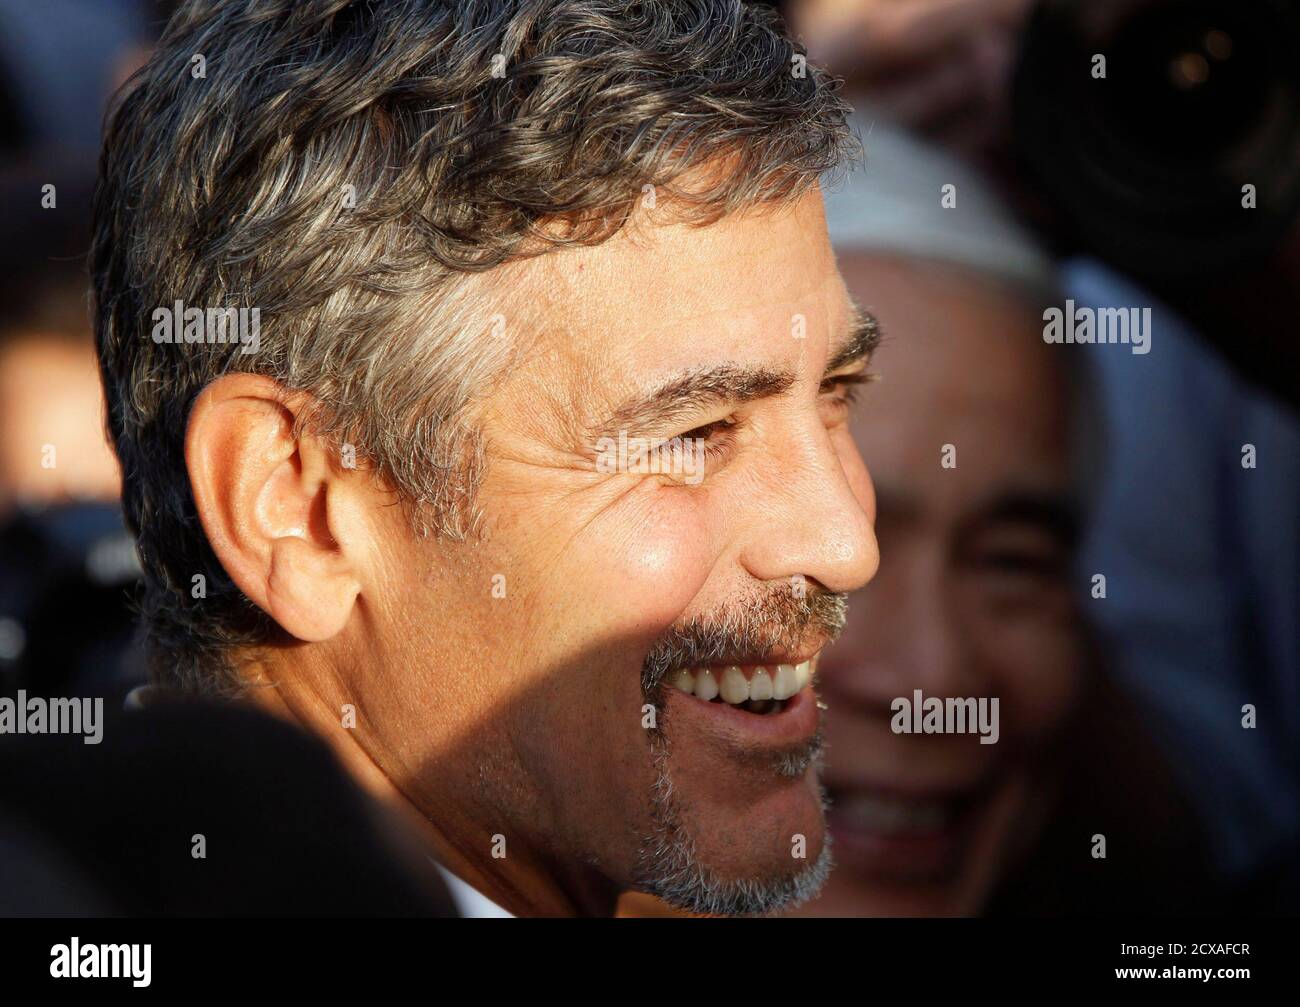 U.S. actor George Clooney smiles after South Sudan's President Salva Kiir  cast his ballot at a polling station in Juba, south Sudan January 9, 2011.  Millions of south Sudanese started voting on